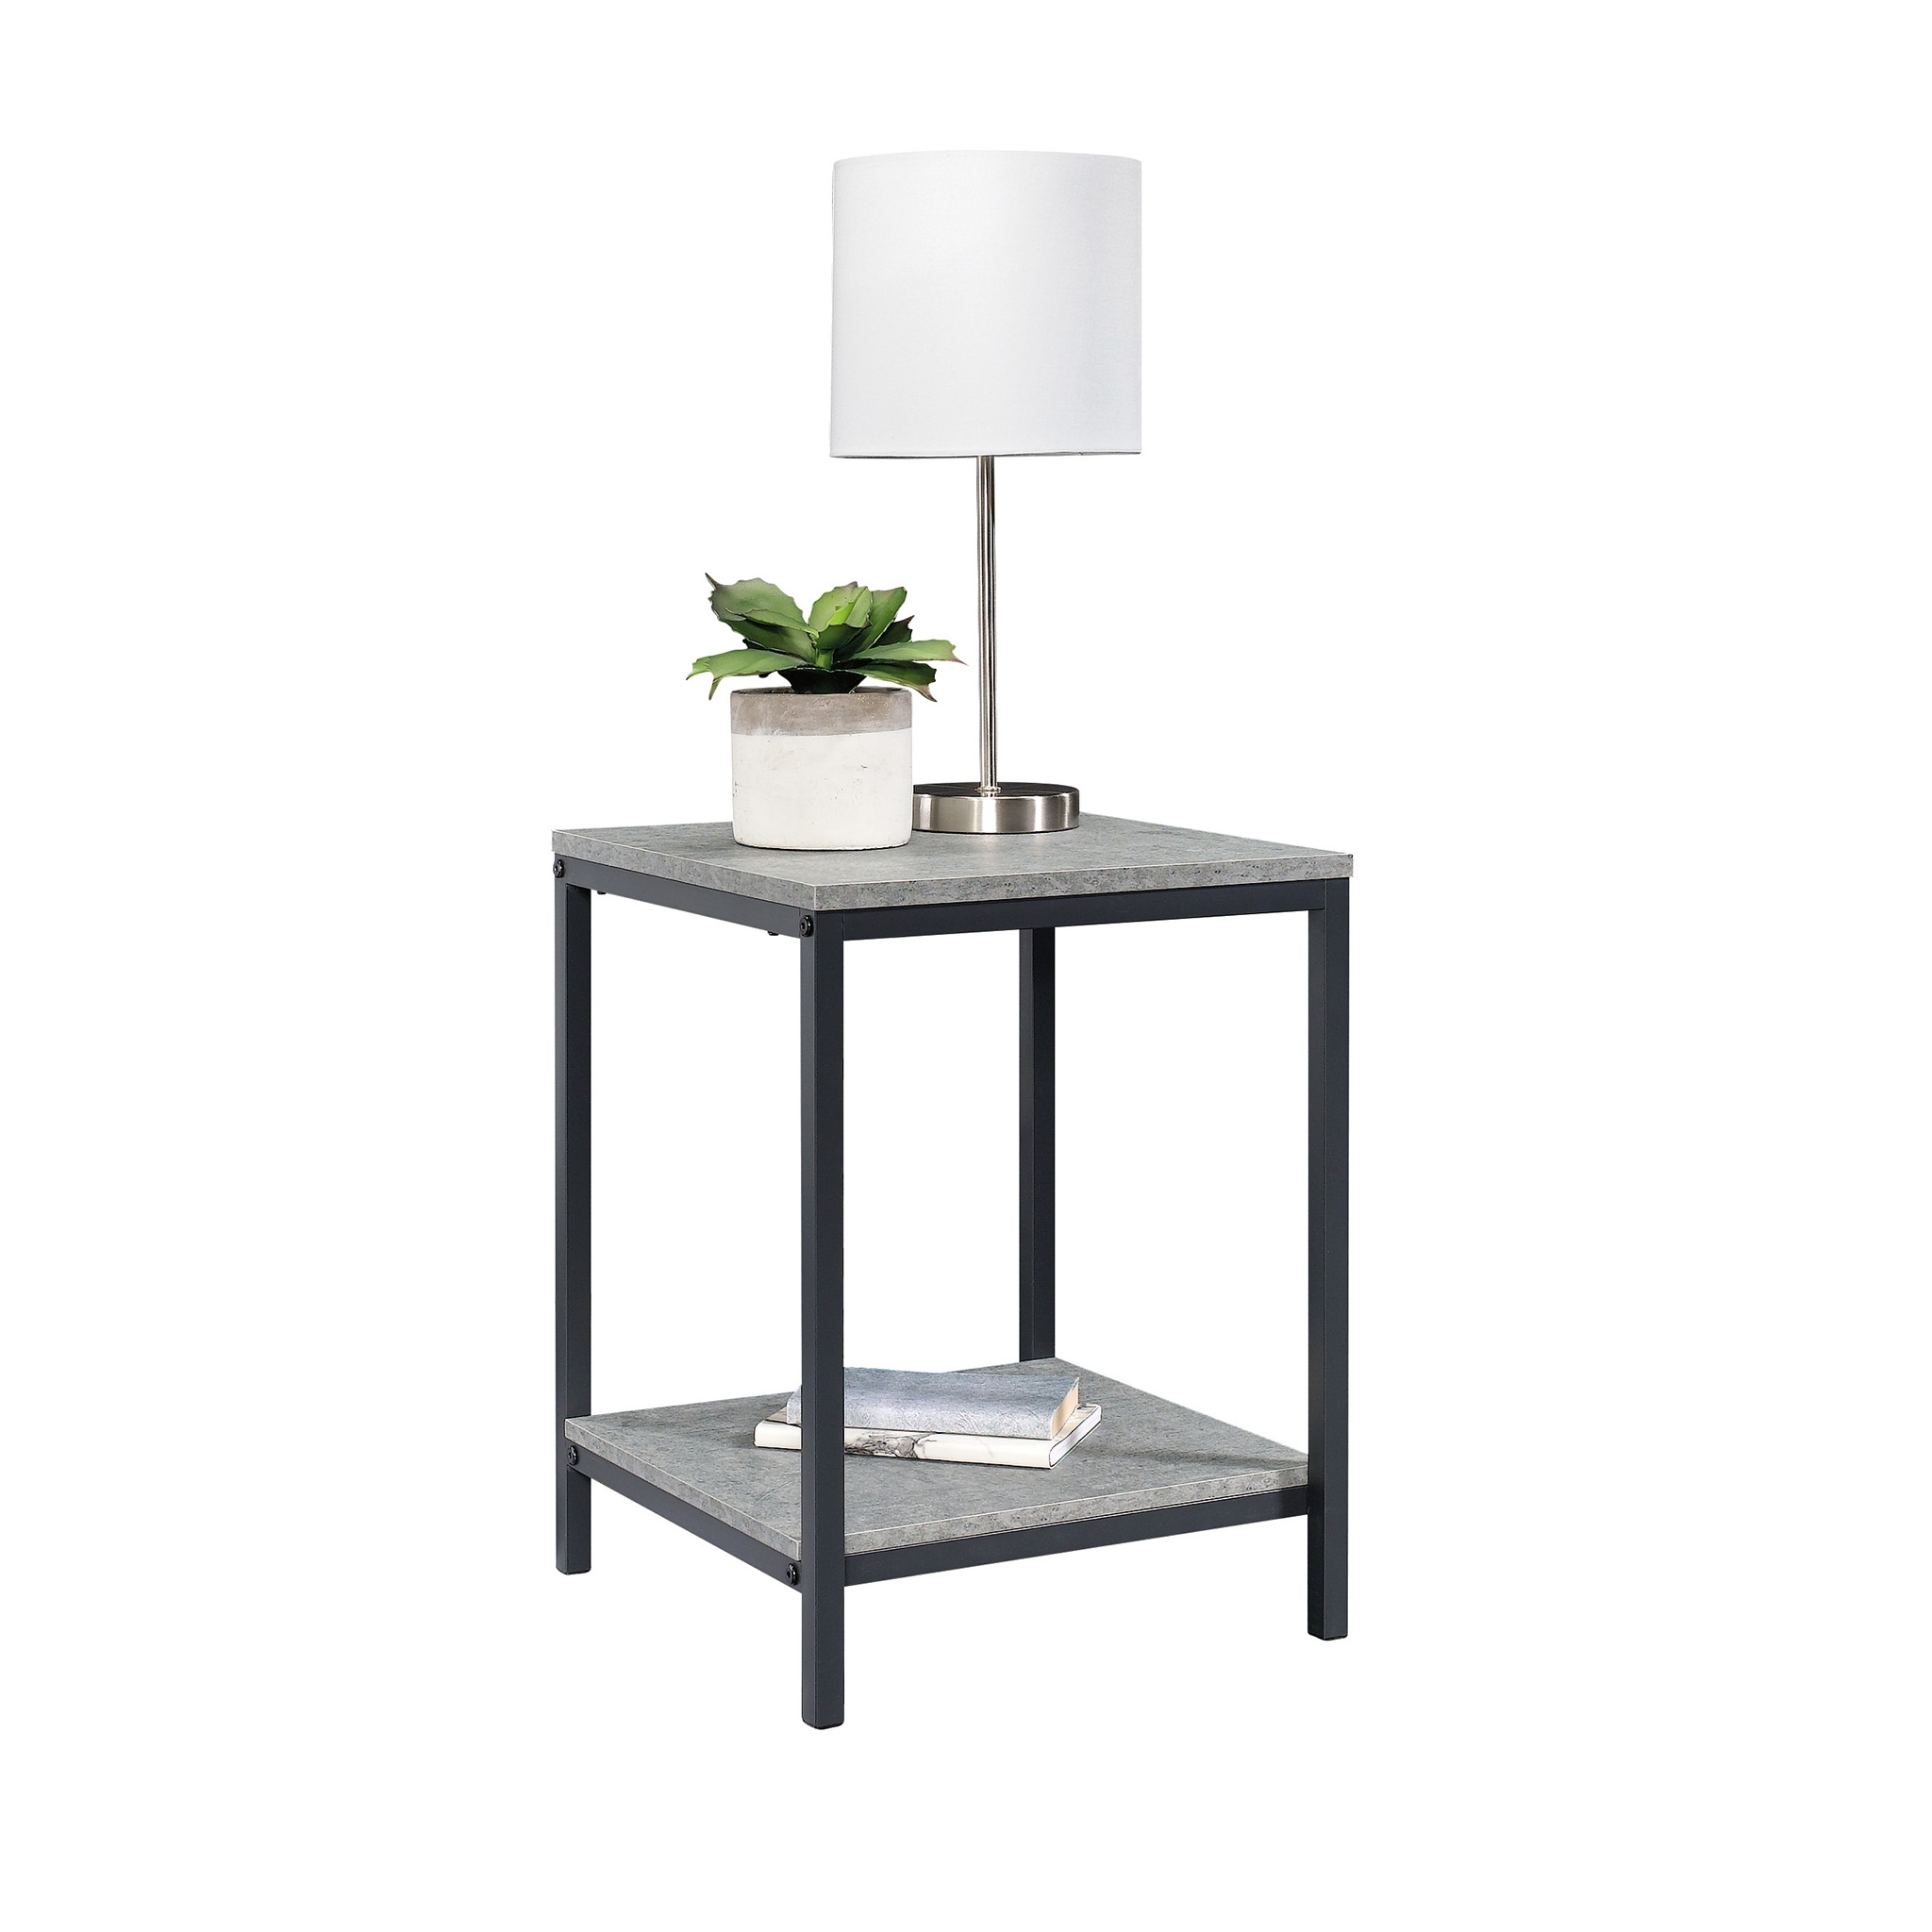 Curiod Square Metal Frame End Table, Faux Concrete Finish - image 5 of 9